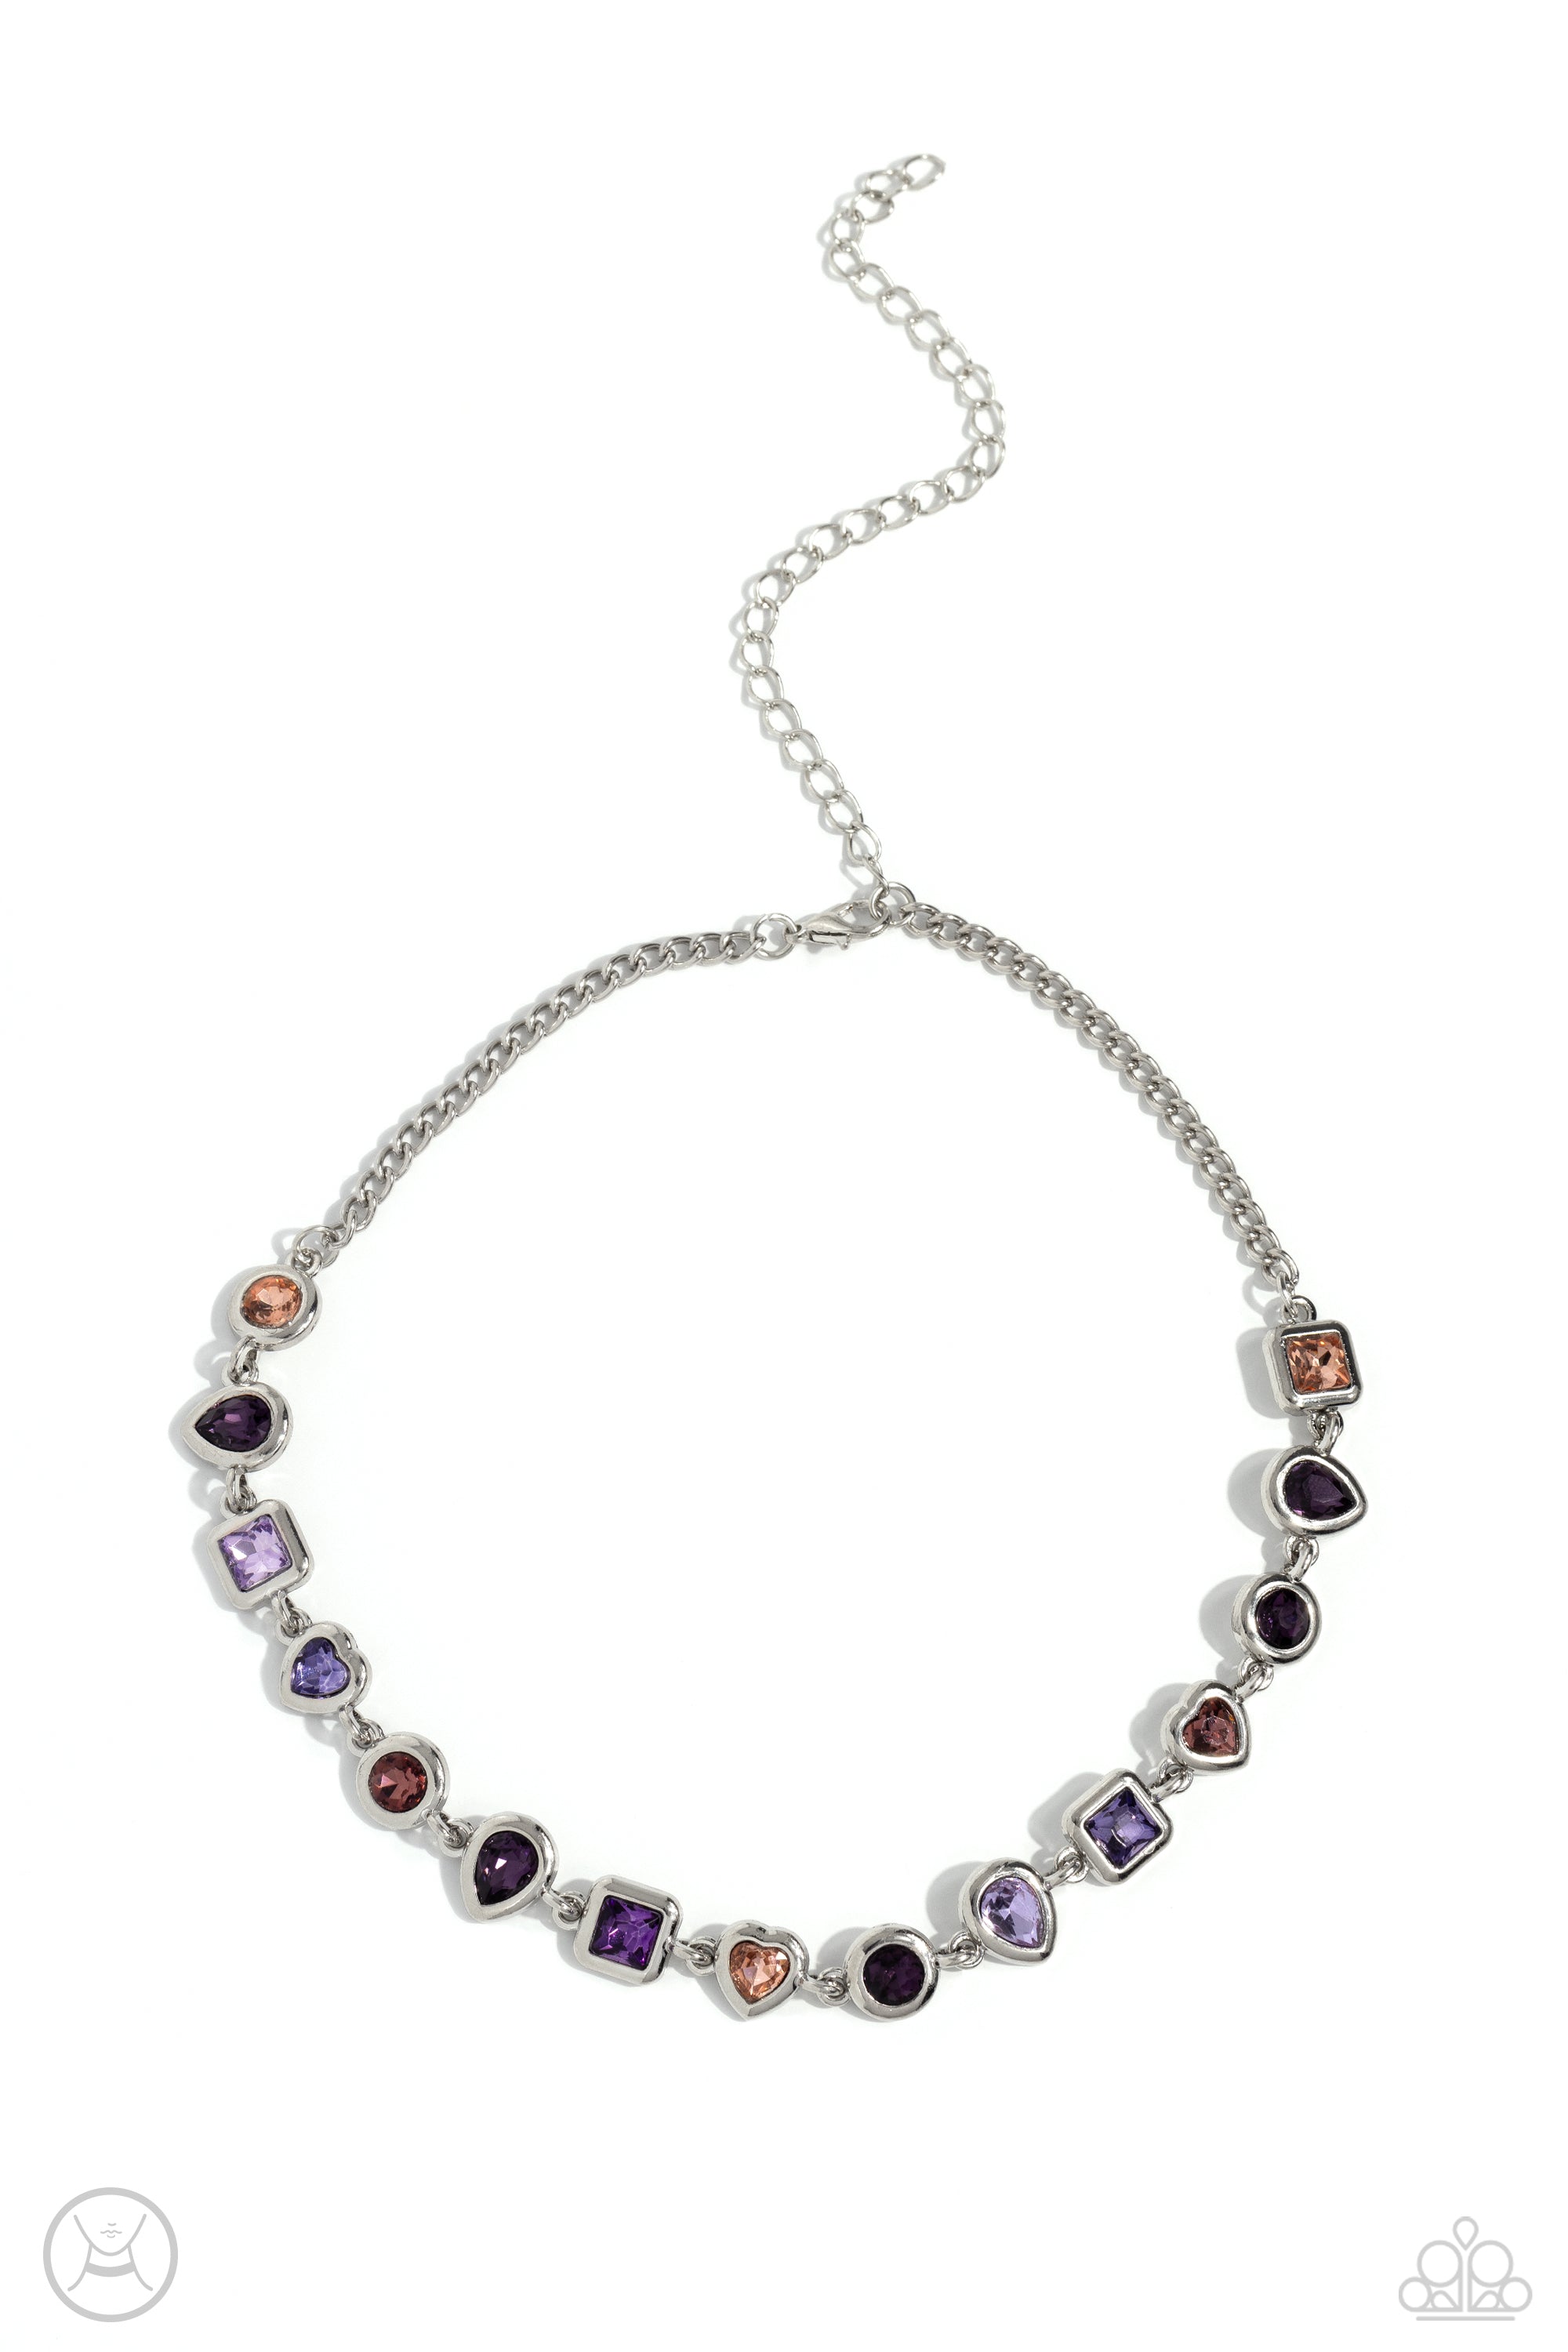 Abstract Admirer Purple Rhinestone Choker Necklace - Paparazzi Accessories- lightbox - CarasShop.com - $5 Jewelry by Cara Jewels